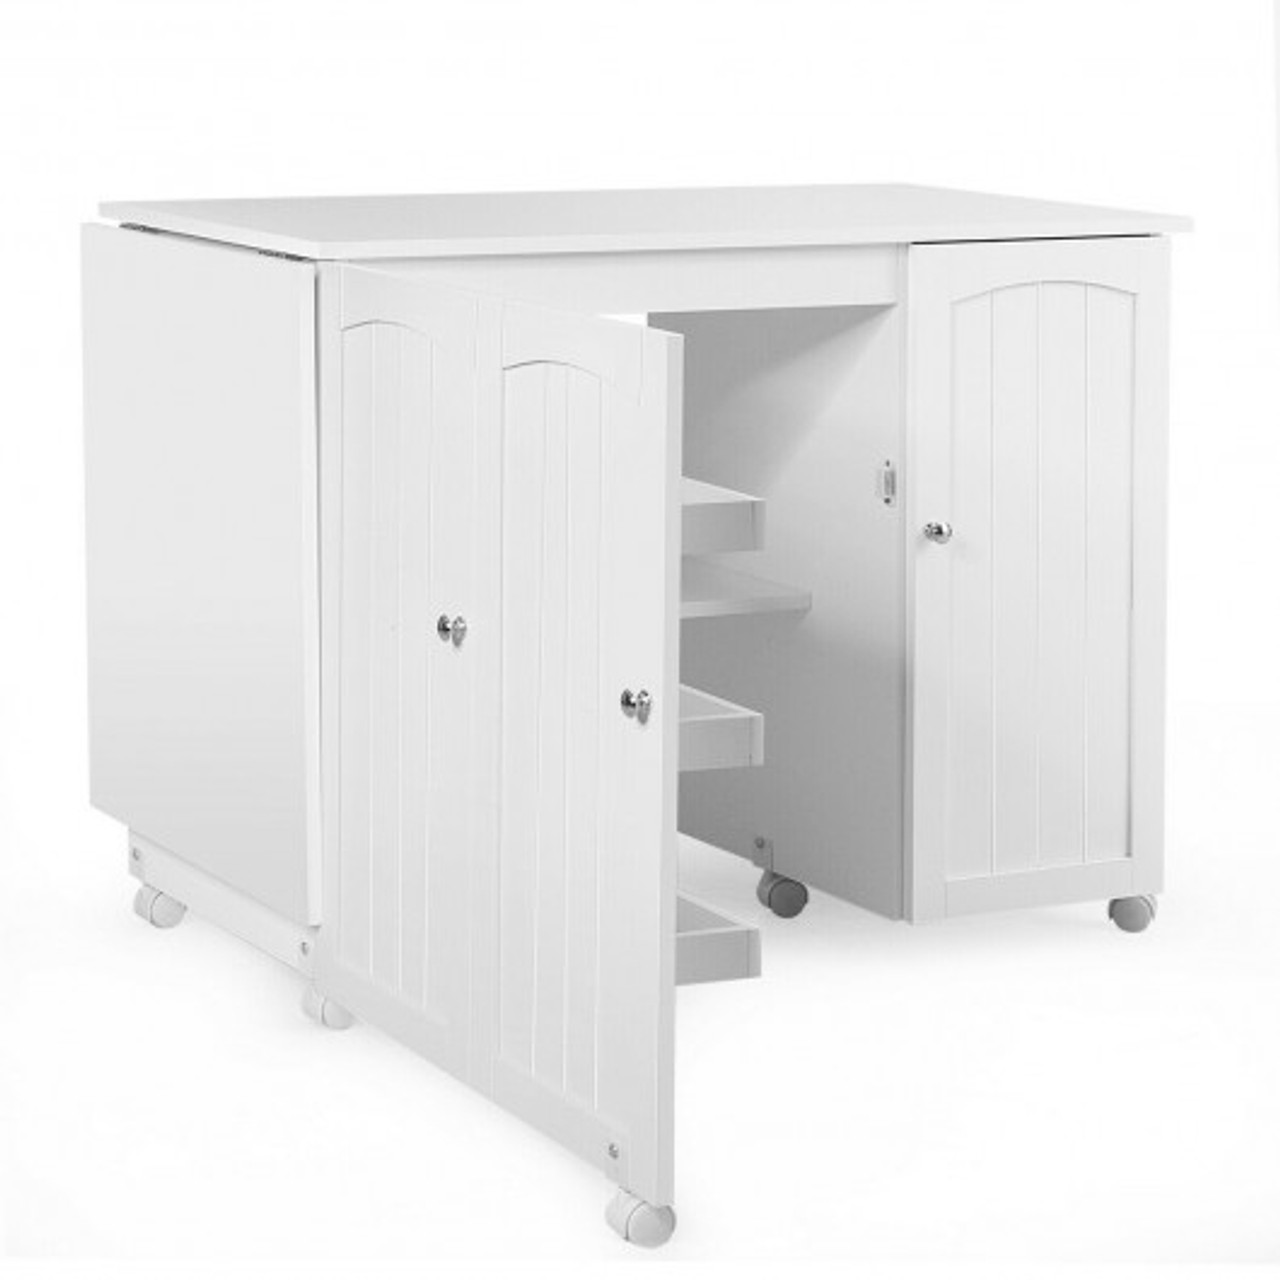 Folding Sewing Table Shelves Storage Cabinet Craft Cart With Wheels White Hw66623wh